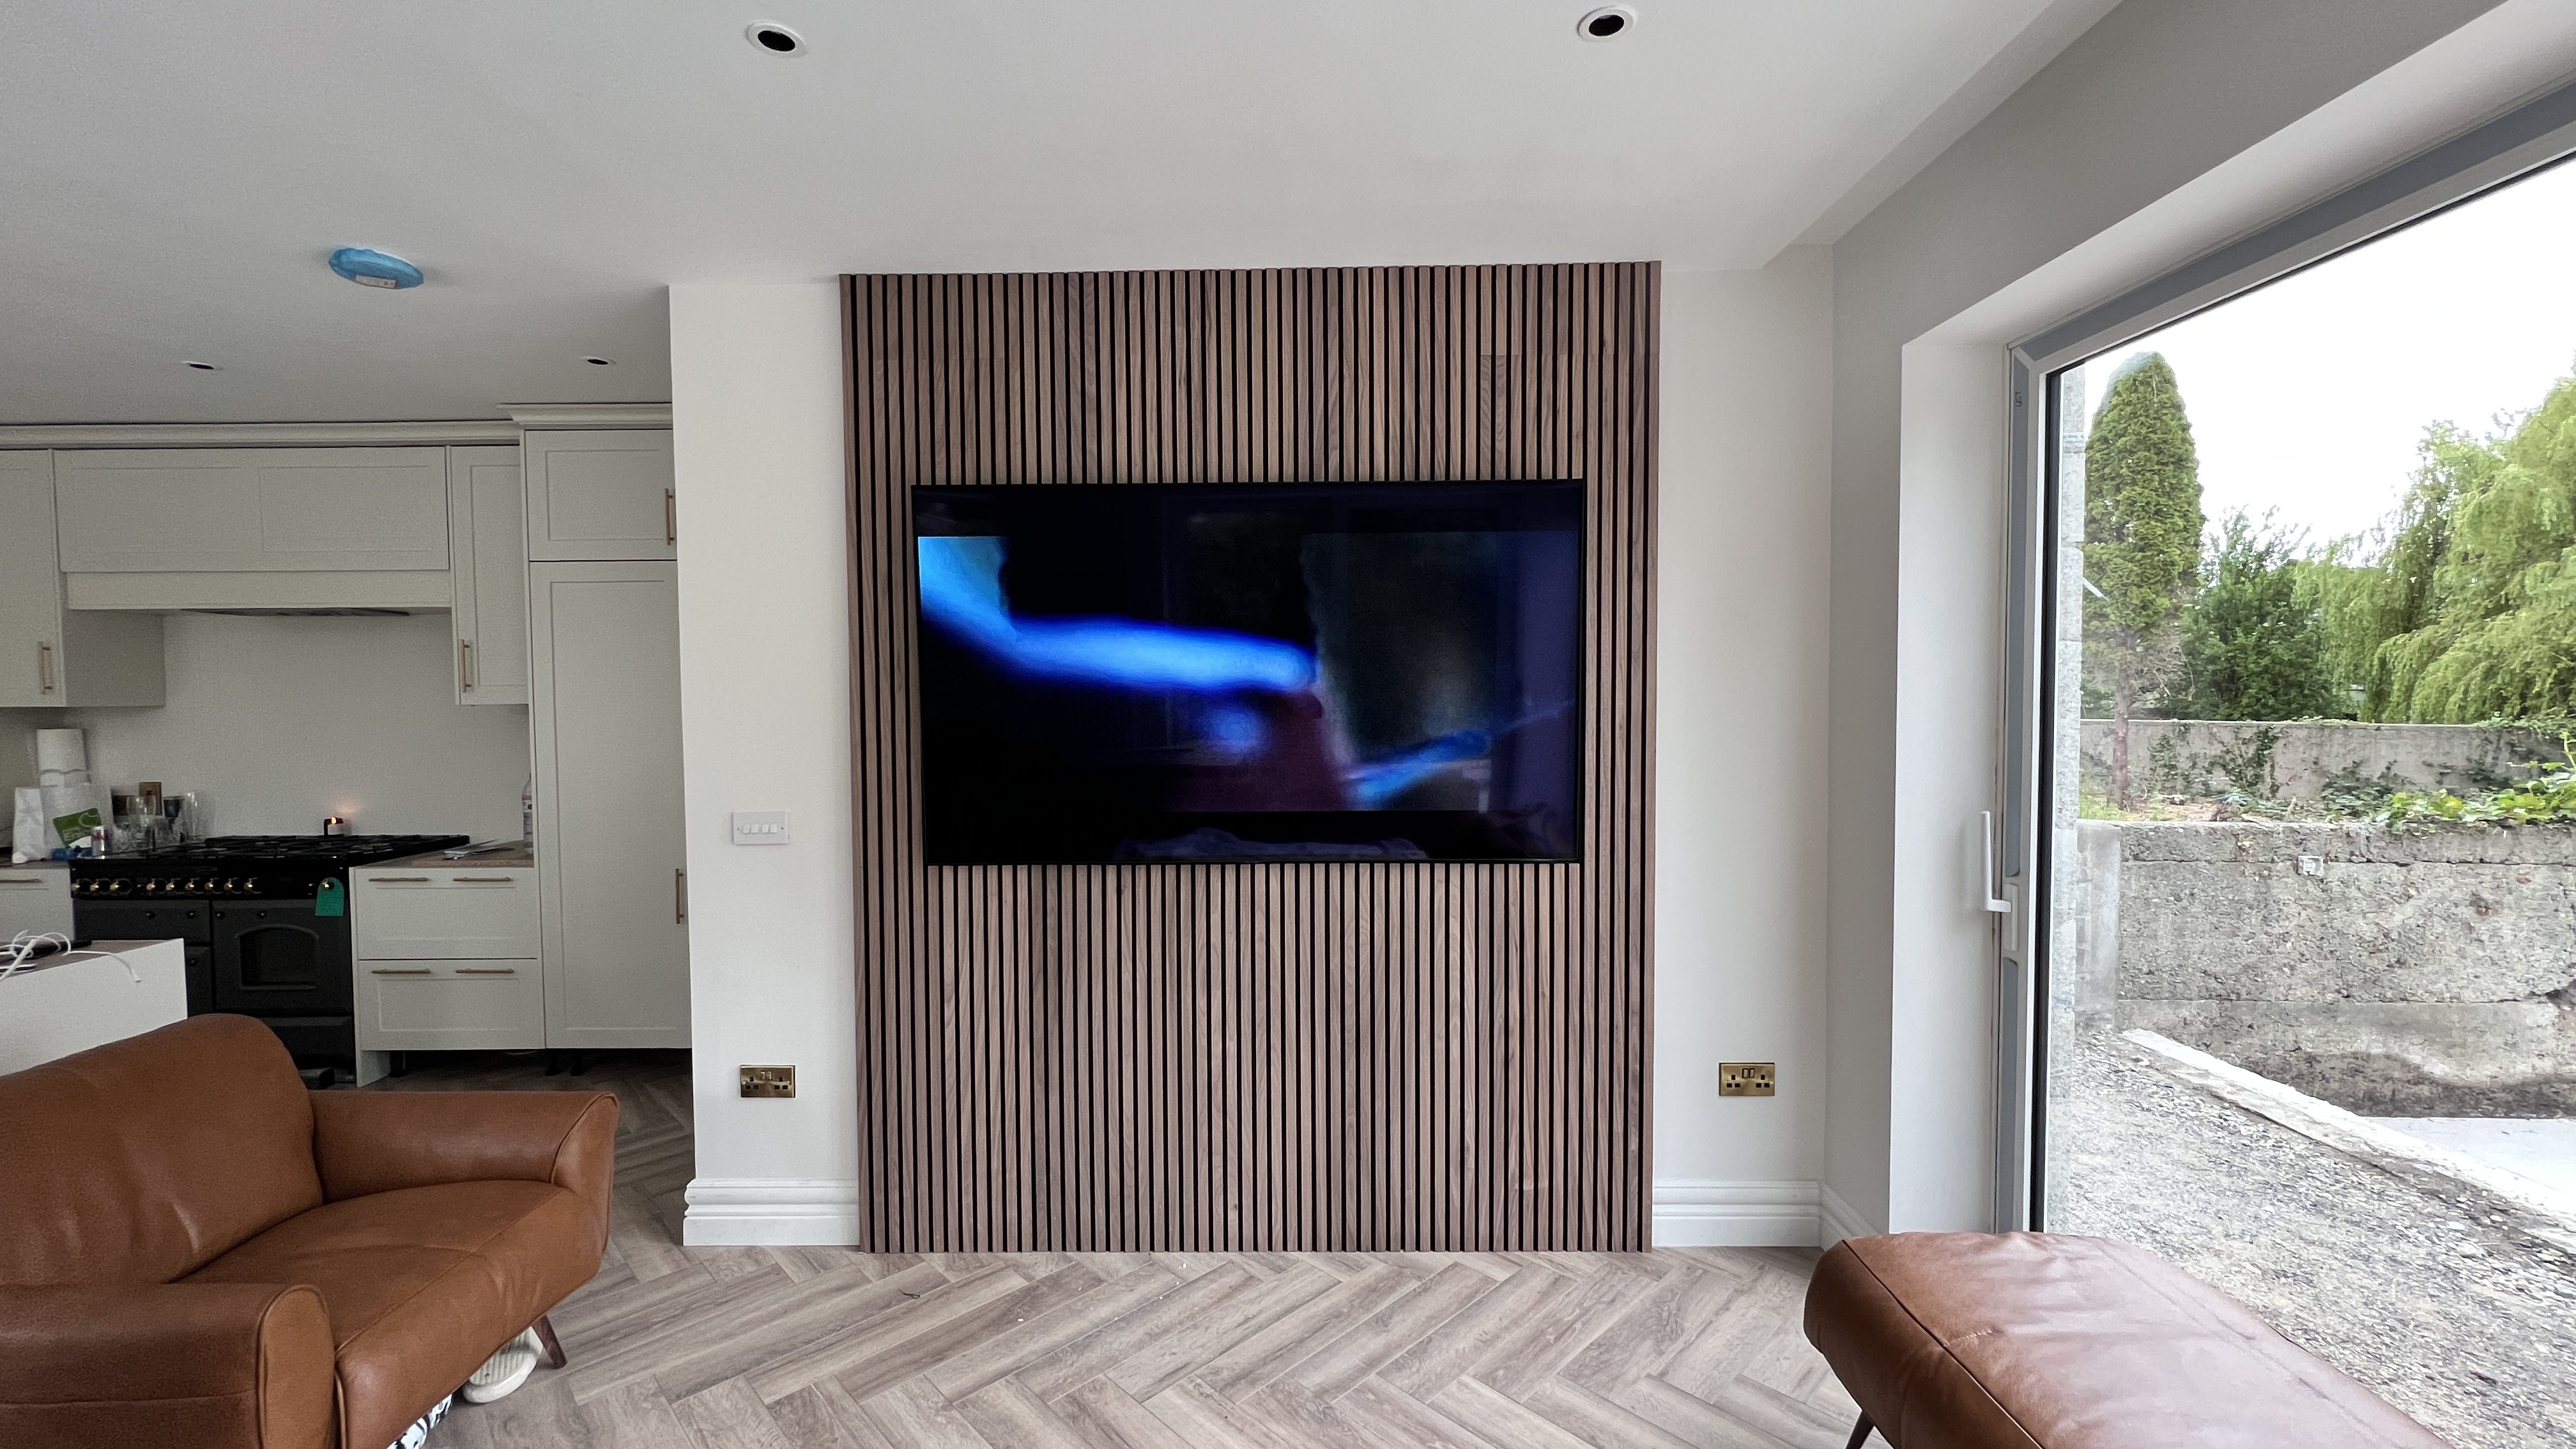 A professional TV installer carefully mounting a flat-screen television onto a living room wall, ensuring optimal viewing angles